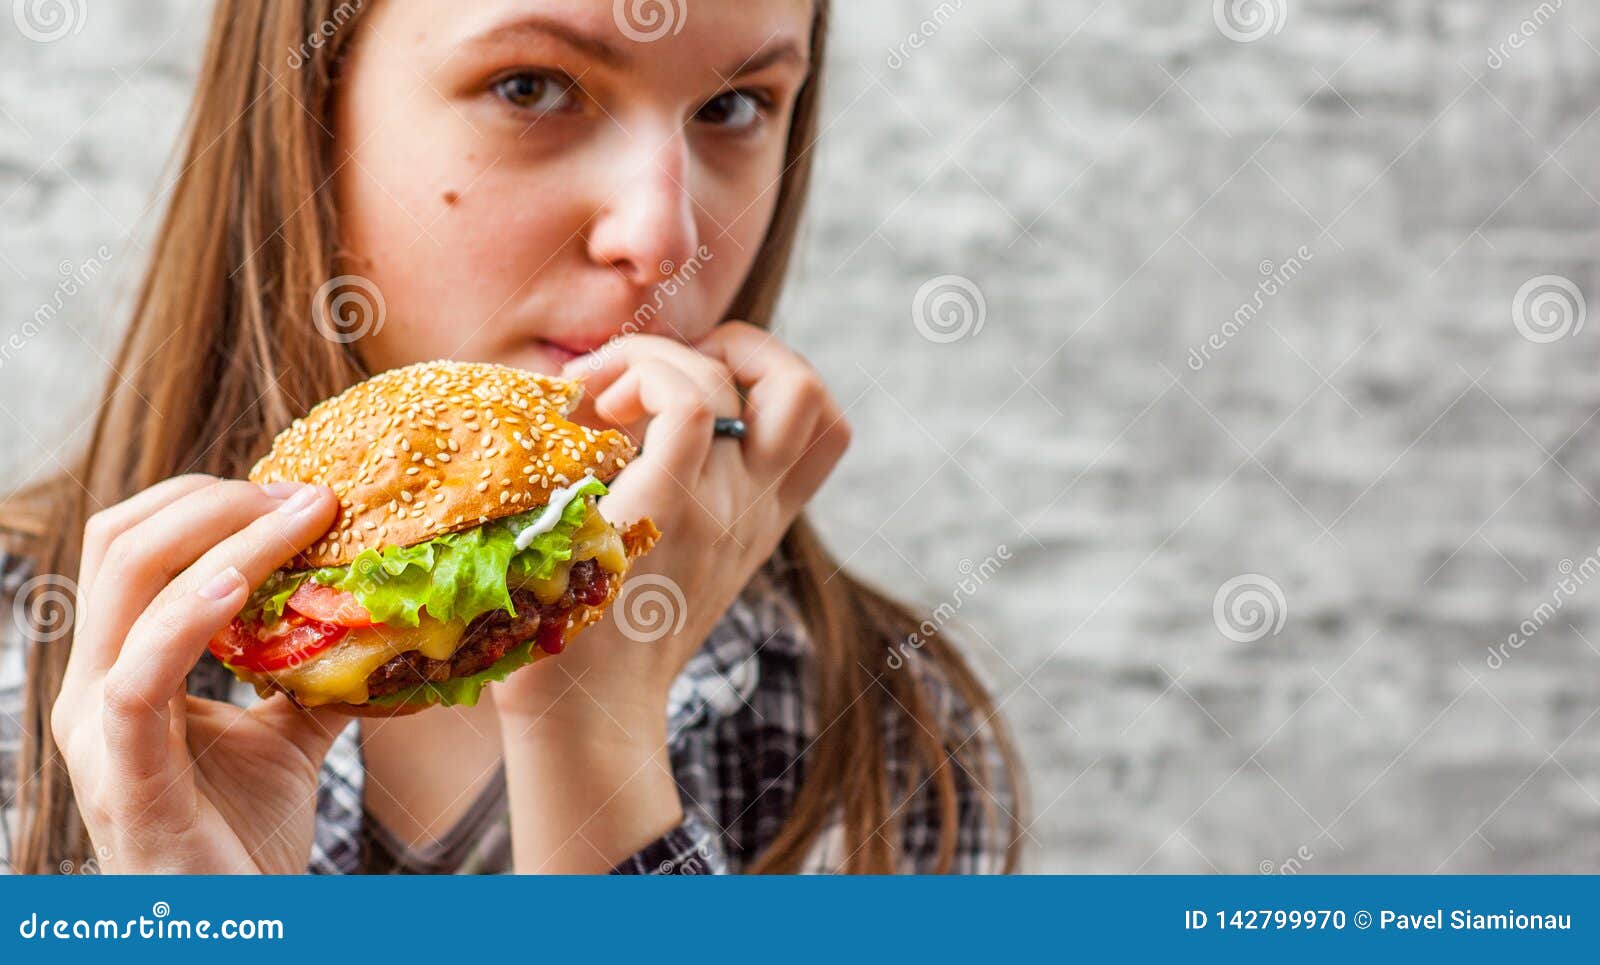 Portrait Of Young Teenager Brunette Girl With Long Hair Eating Burger